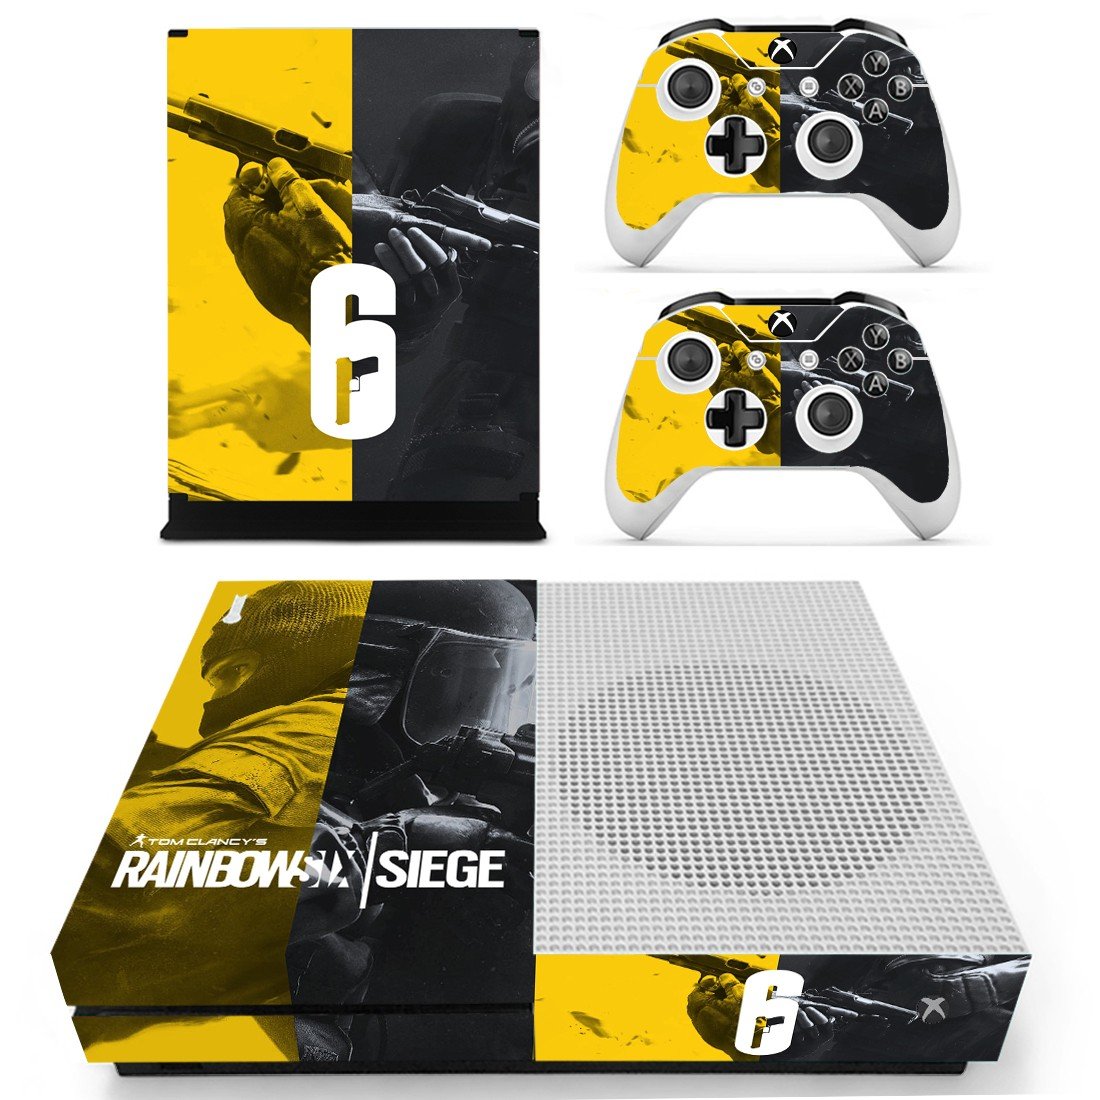 Rainbow Six Siege Sticker For Xbox One S And Controllers